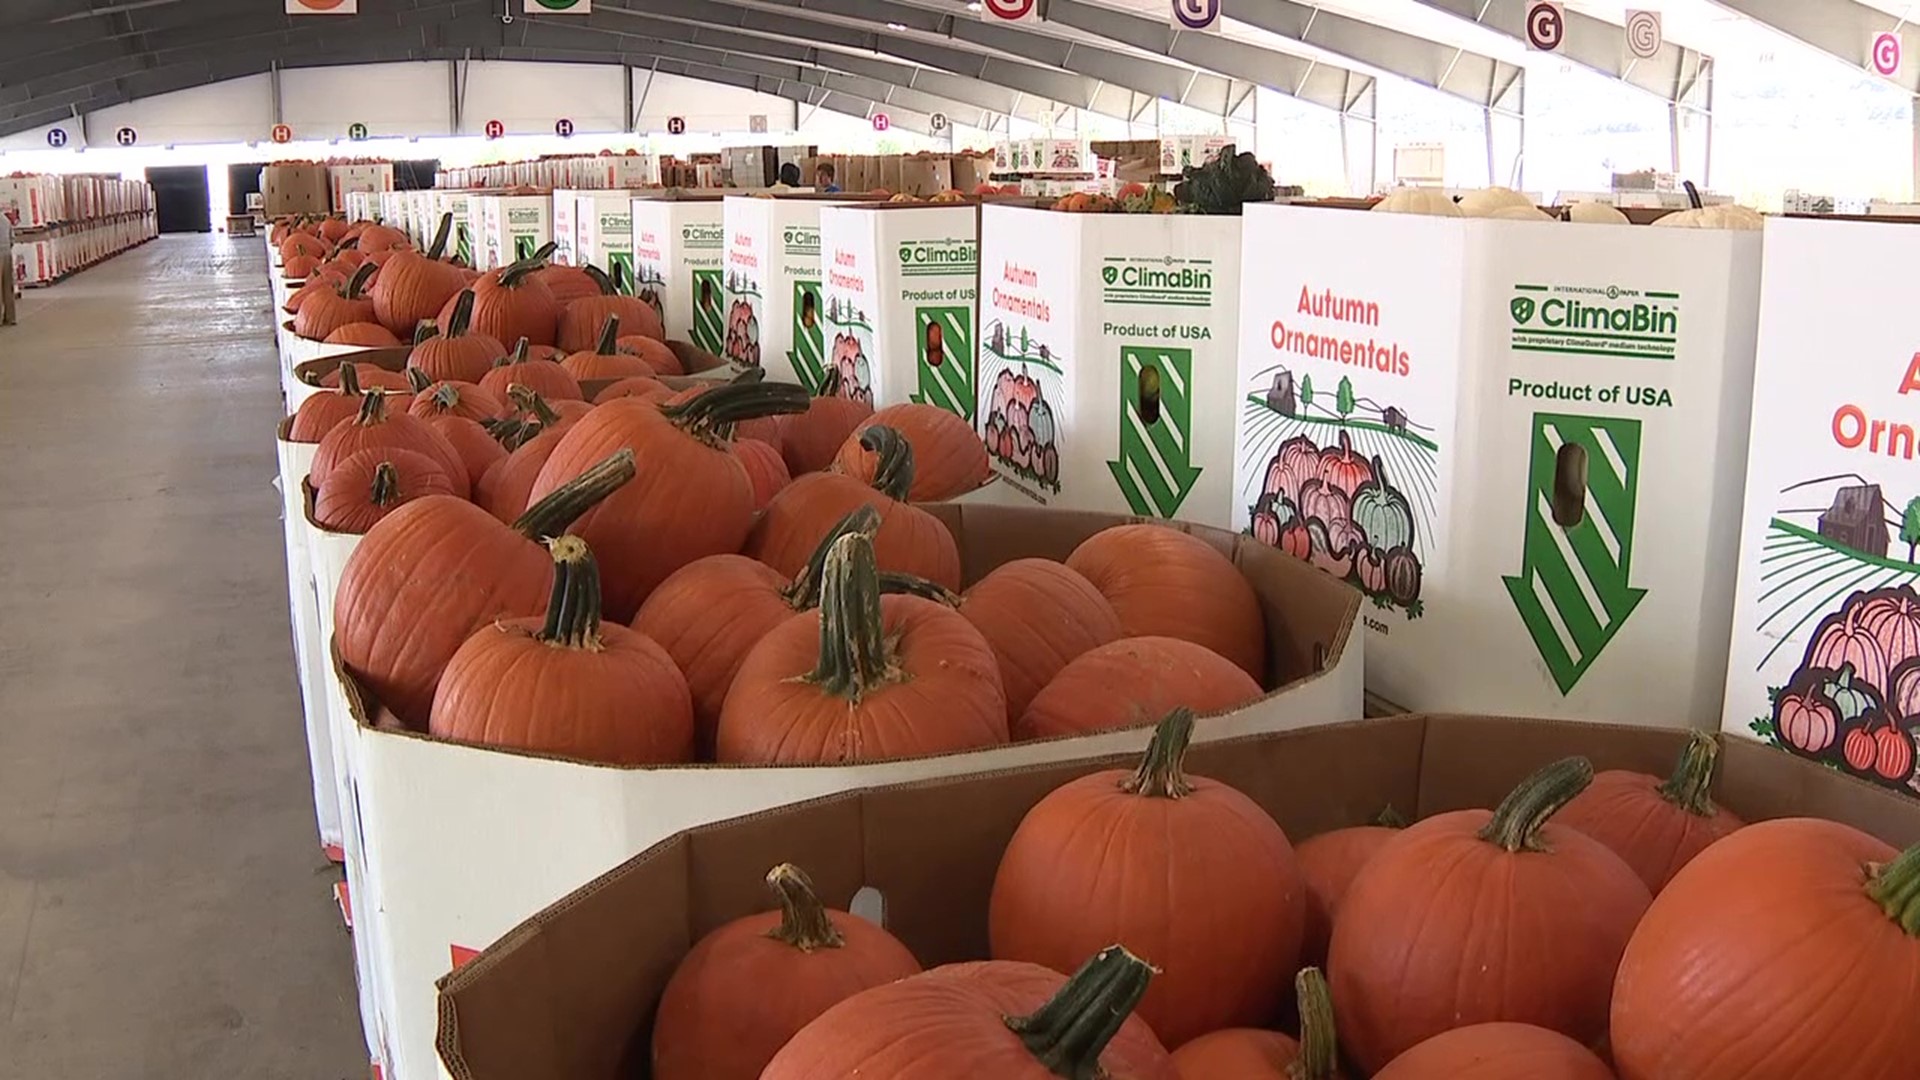 There are more than 3,000 bins filled with pumpkins for sale.